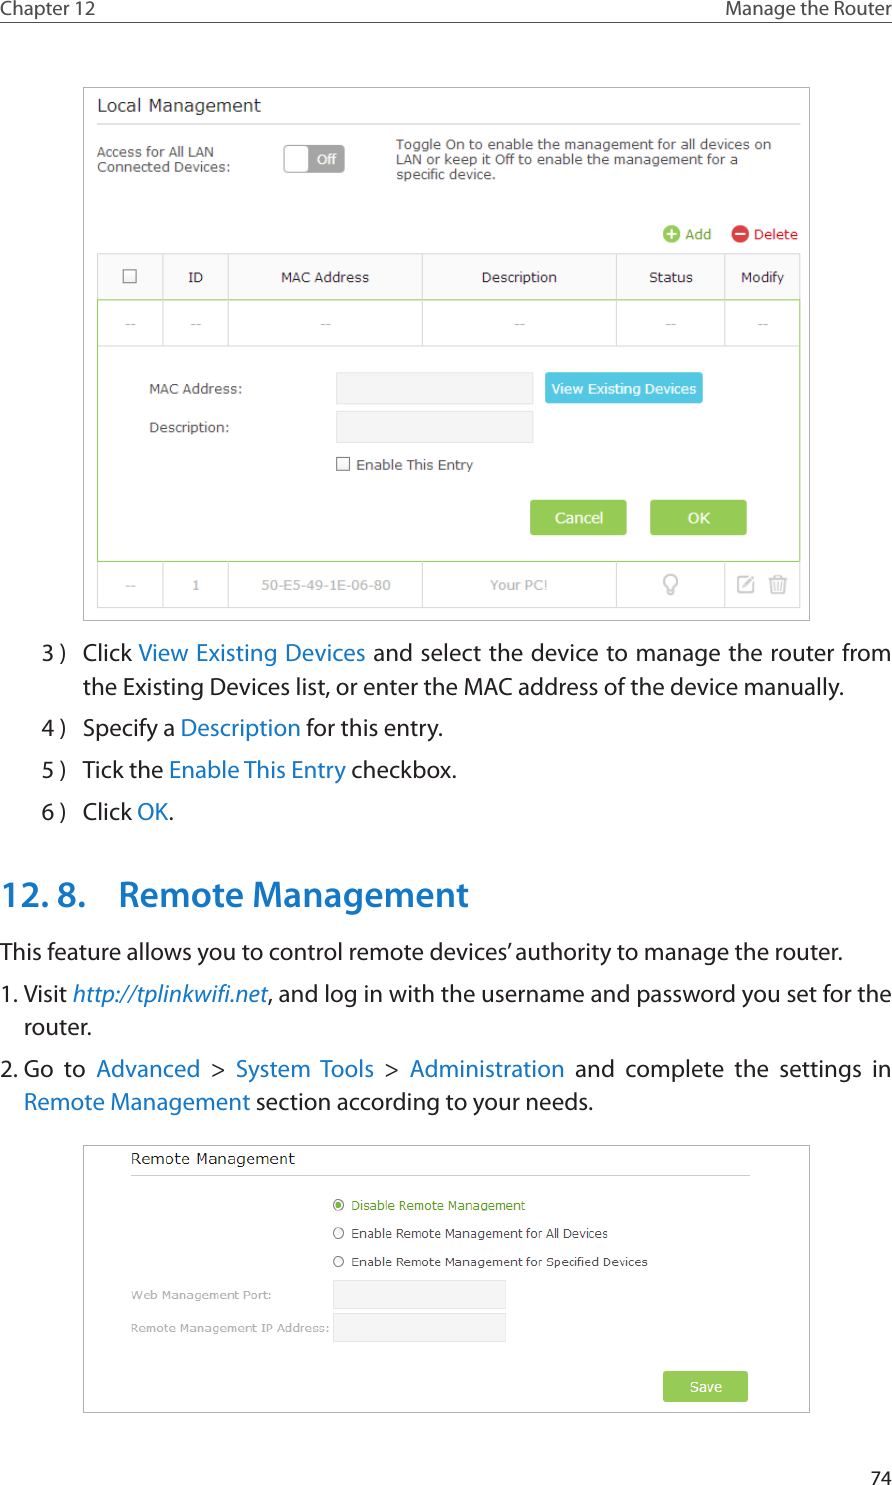 74Chapter 12 Manage the Router 3 )  Click View Existing Devices and select the device to manage the router from the Existing Devices list, or enter the MAC address of the device manually.4 )  Specify a Description for this entry.5 )  Tick the Enable This Entry checkbox.6 )  Click OK.12. 8.  Remote ManagementThis feature allows you to control remote devices’ authority to manage the router.1. Visit http://tplinkwifi.net, and log in with the username and password you set for the router.2. Go to Advanced &gt; System Tools &gt;  Administration and complete the settings in Remote Management section according to your needs.